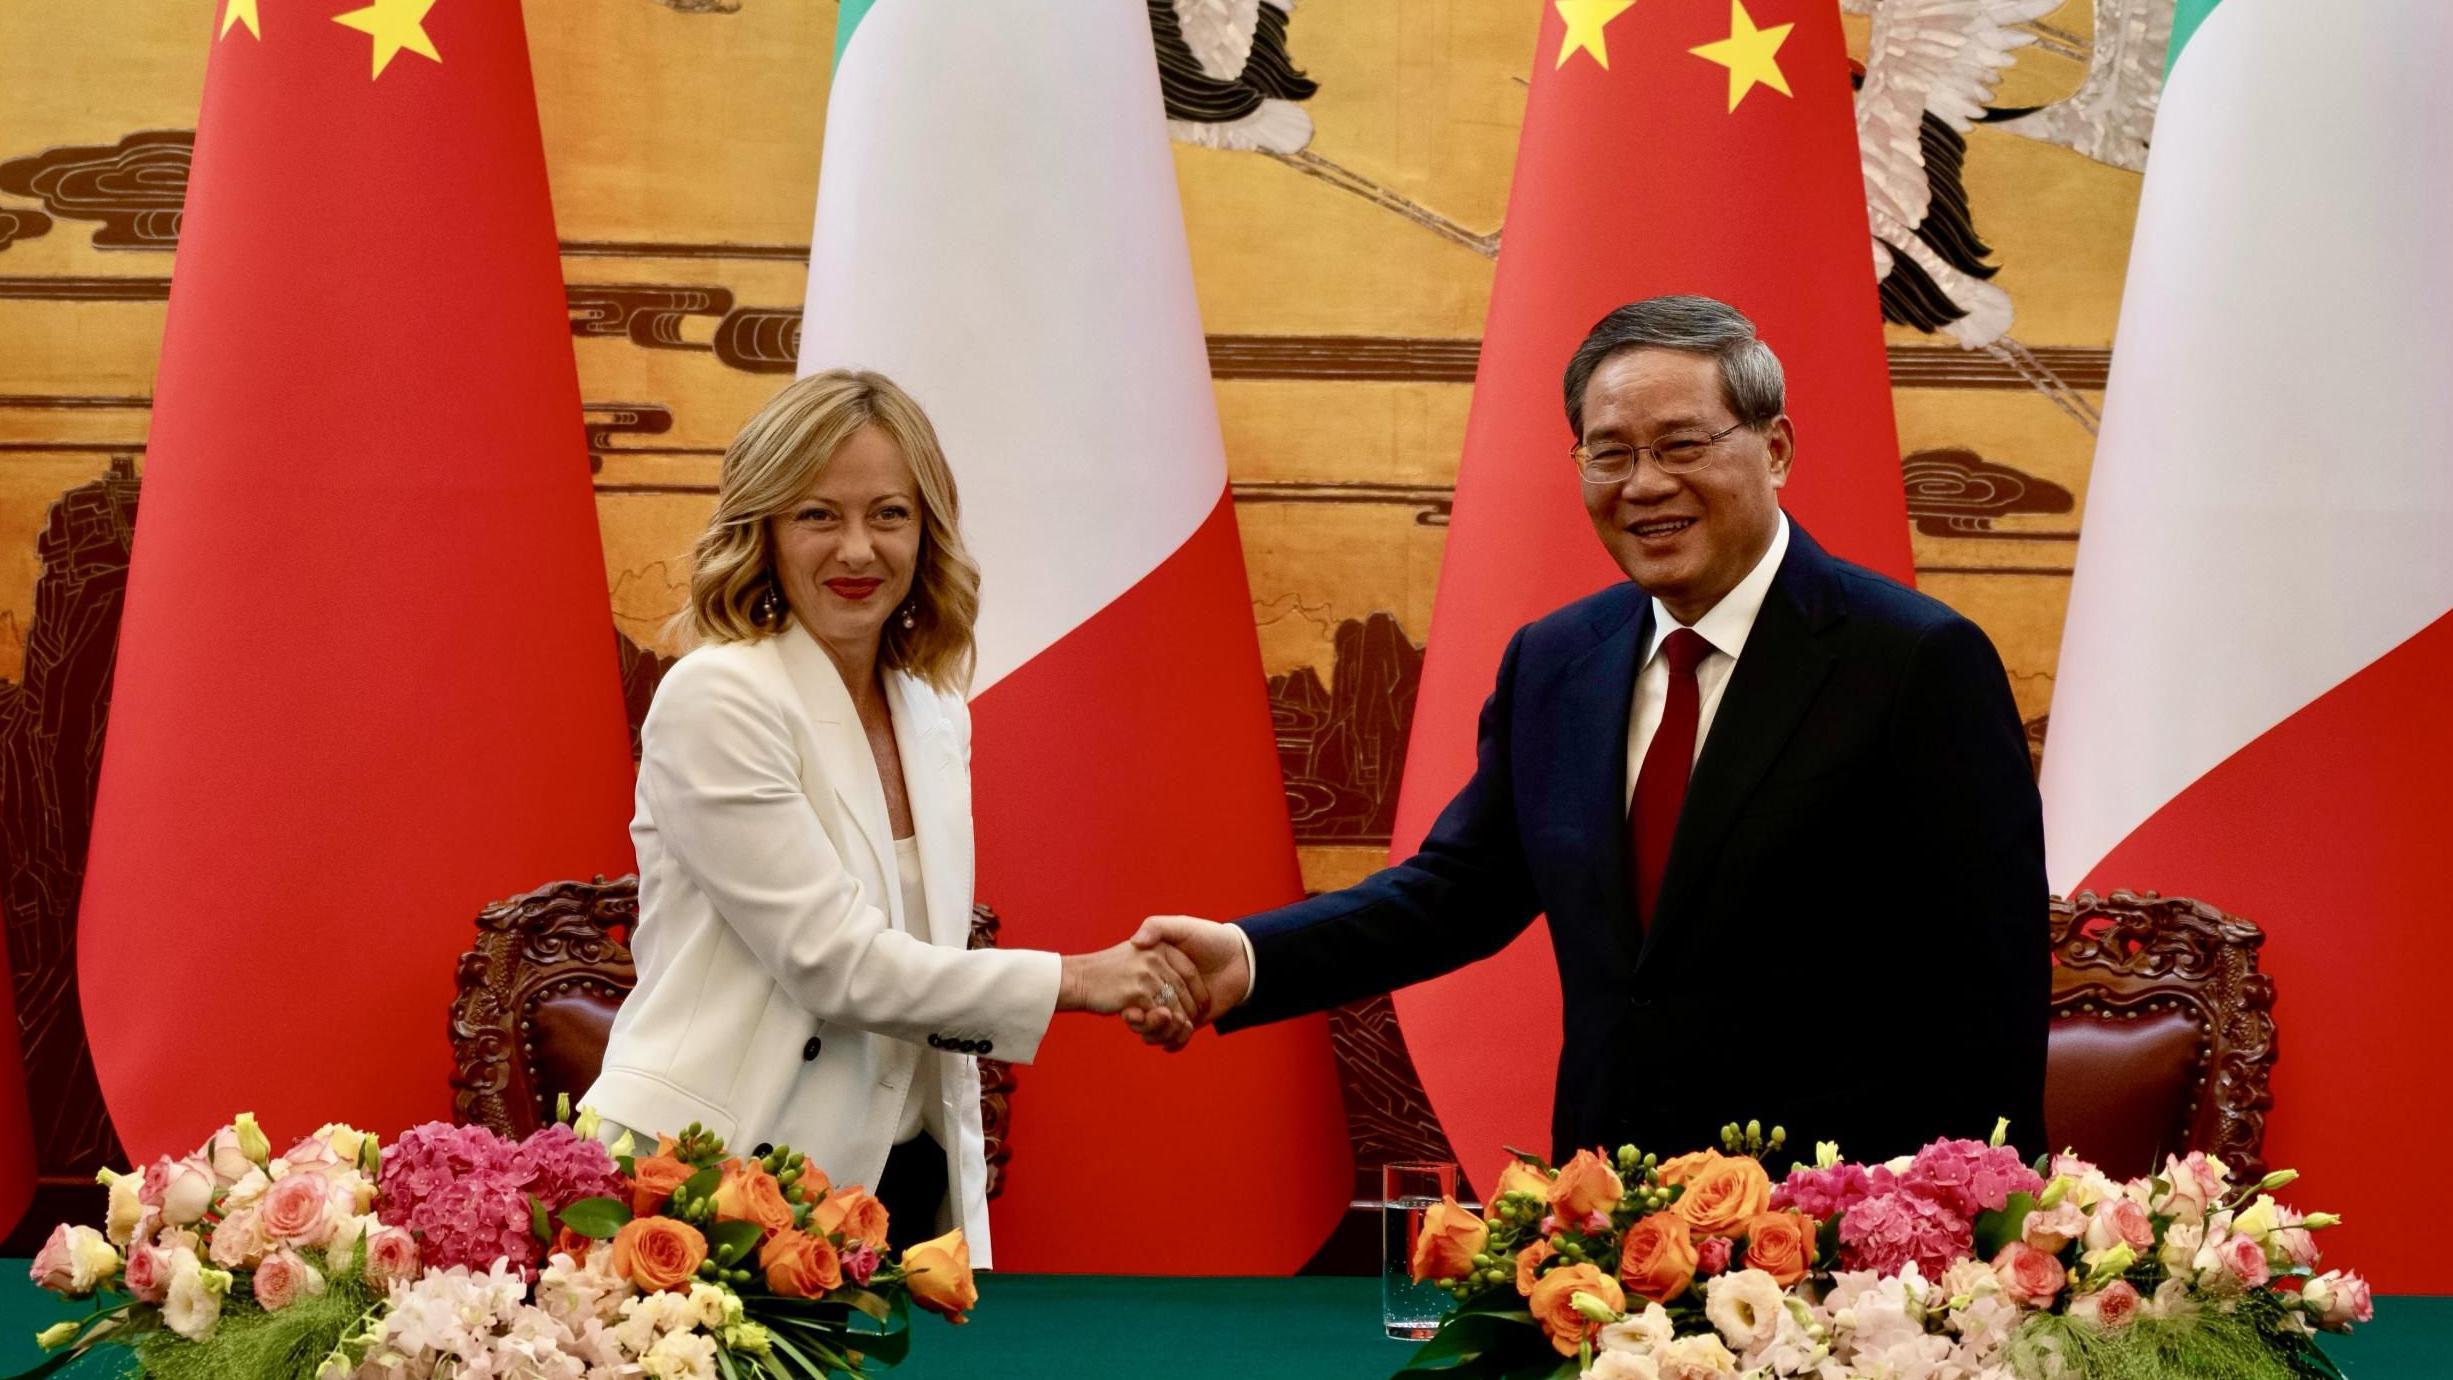 Italy PM Meloni vows to relaunch ties with China